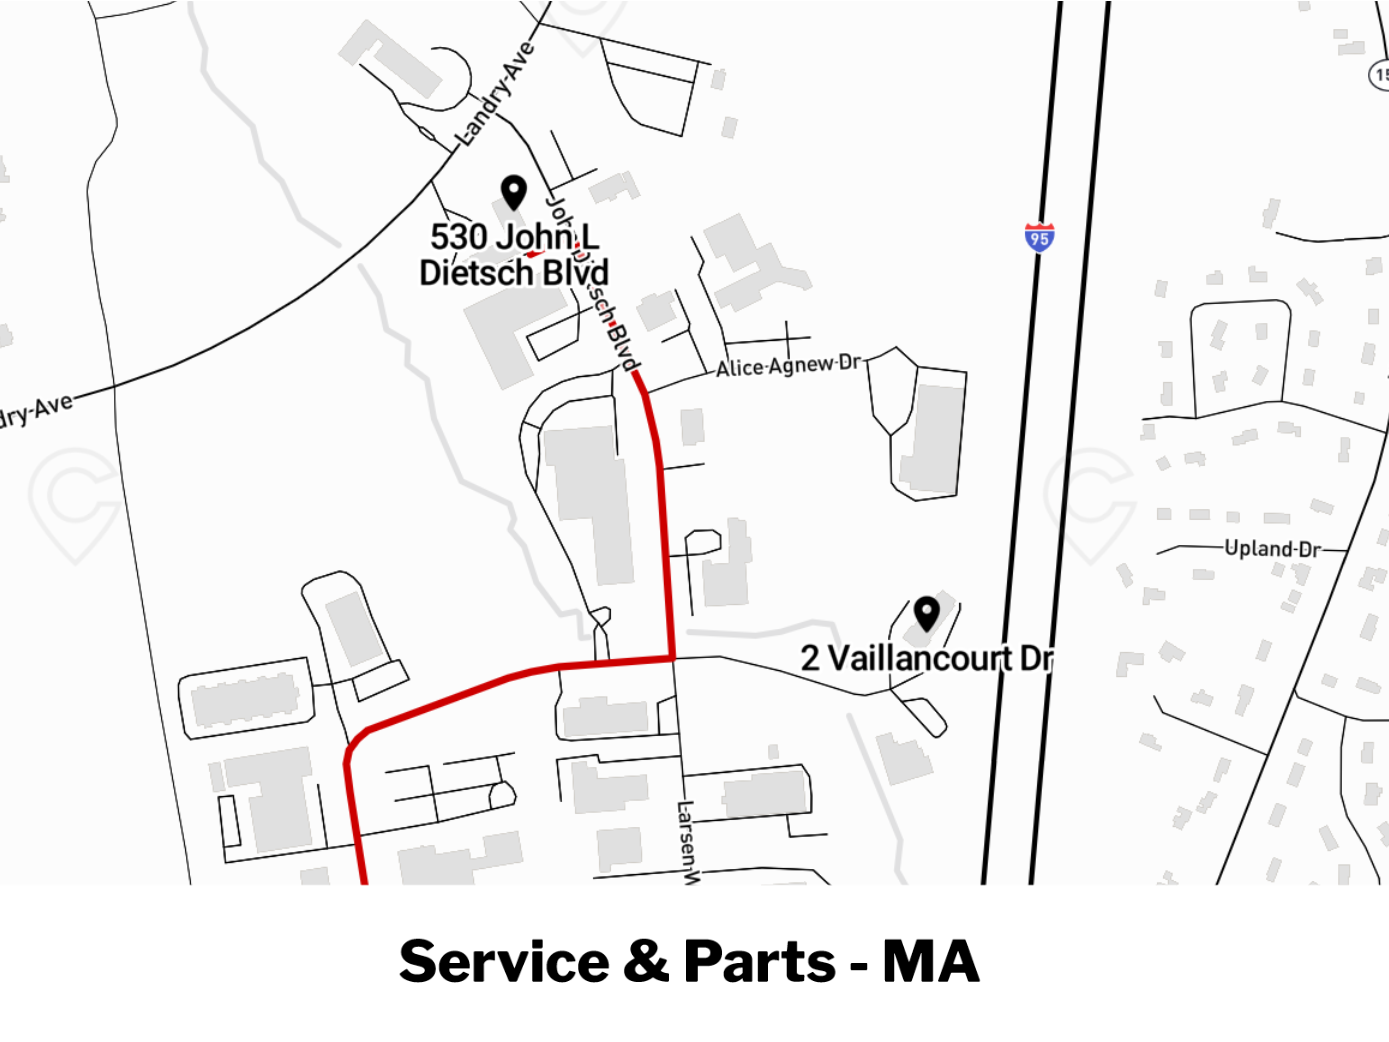 Directions to Service & Parts